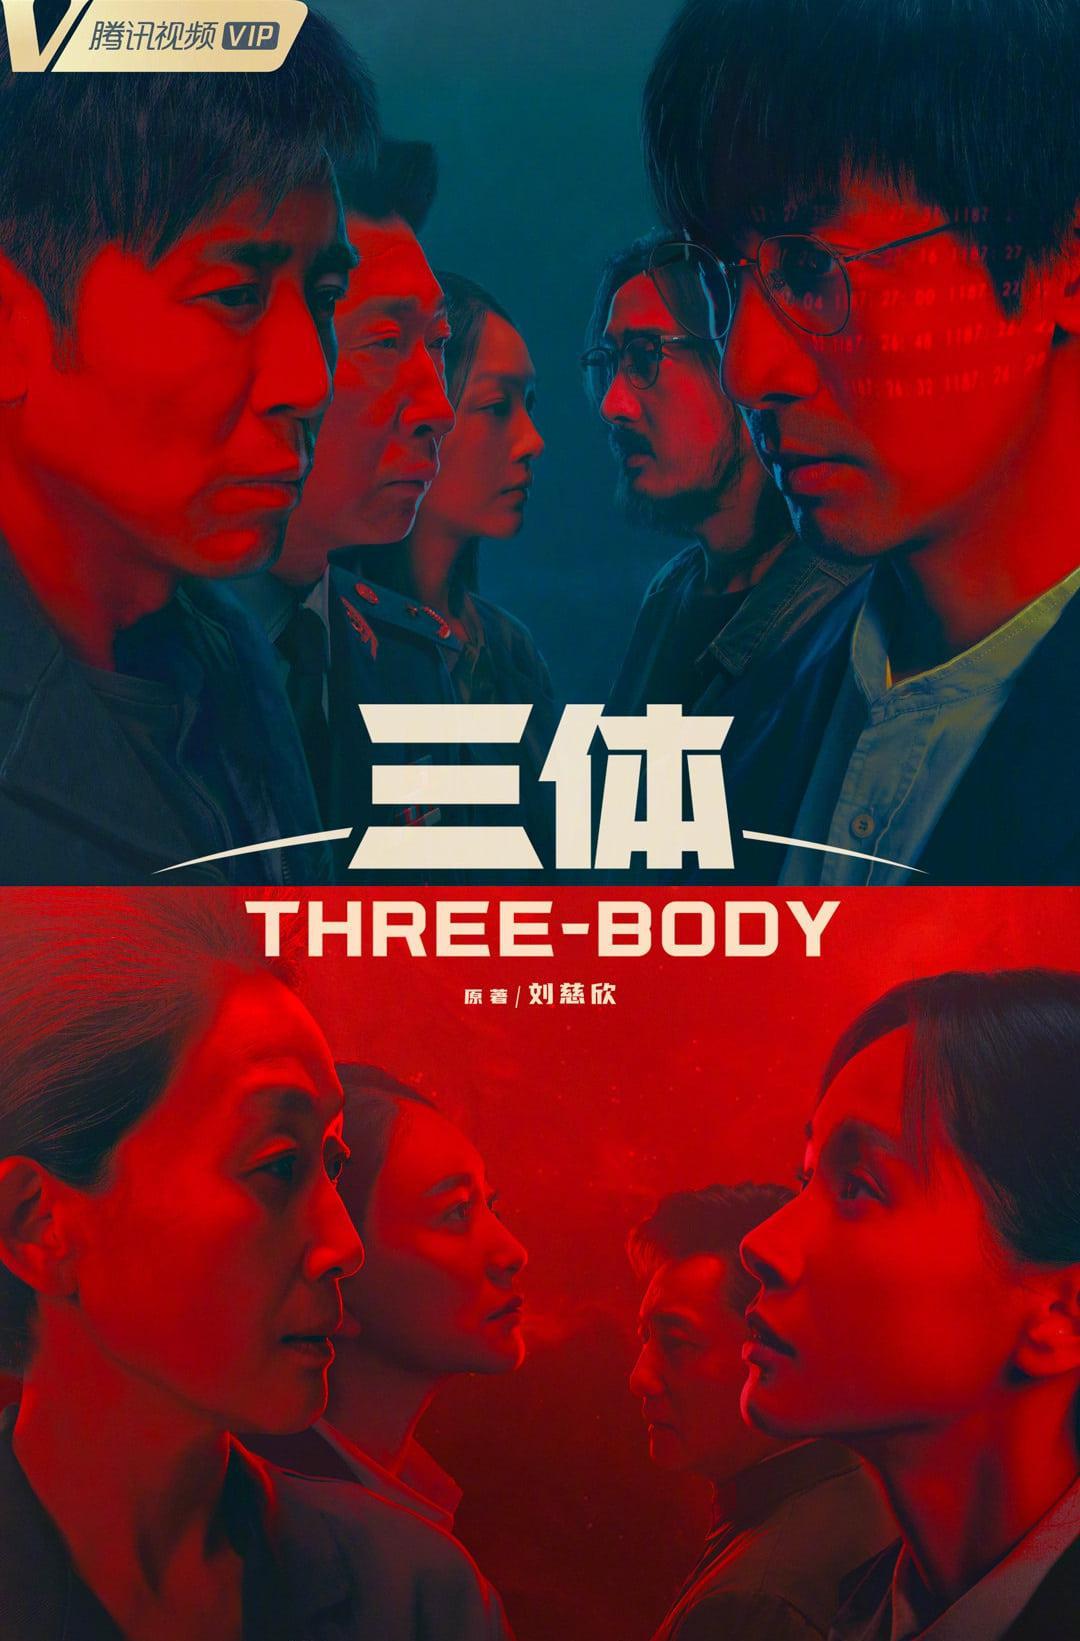 TV ratings for Three-Body (三体) in Argentina. Tencent Video TV series